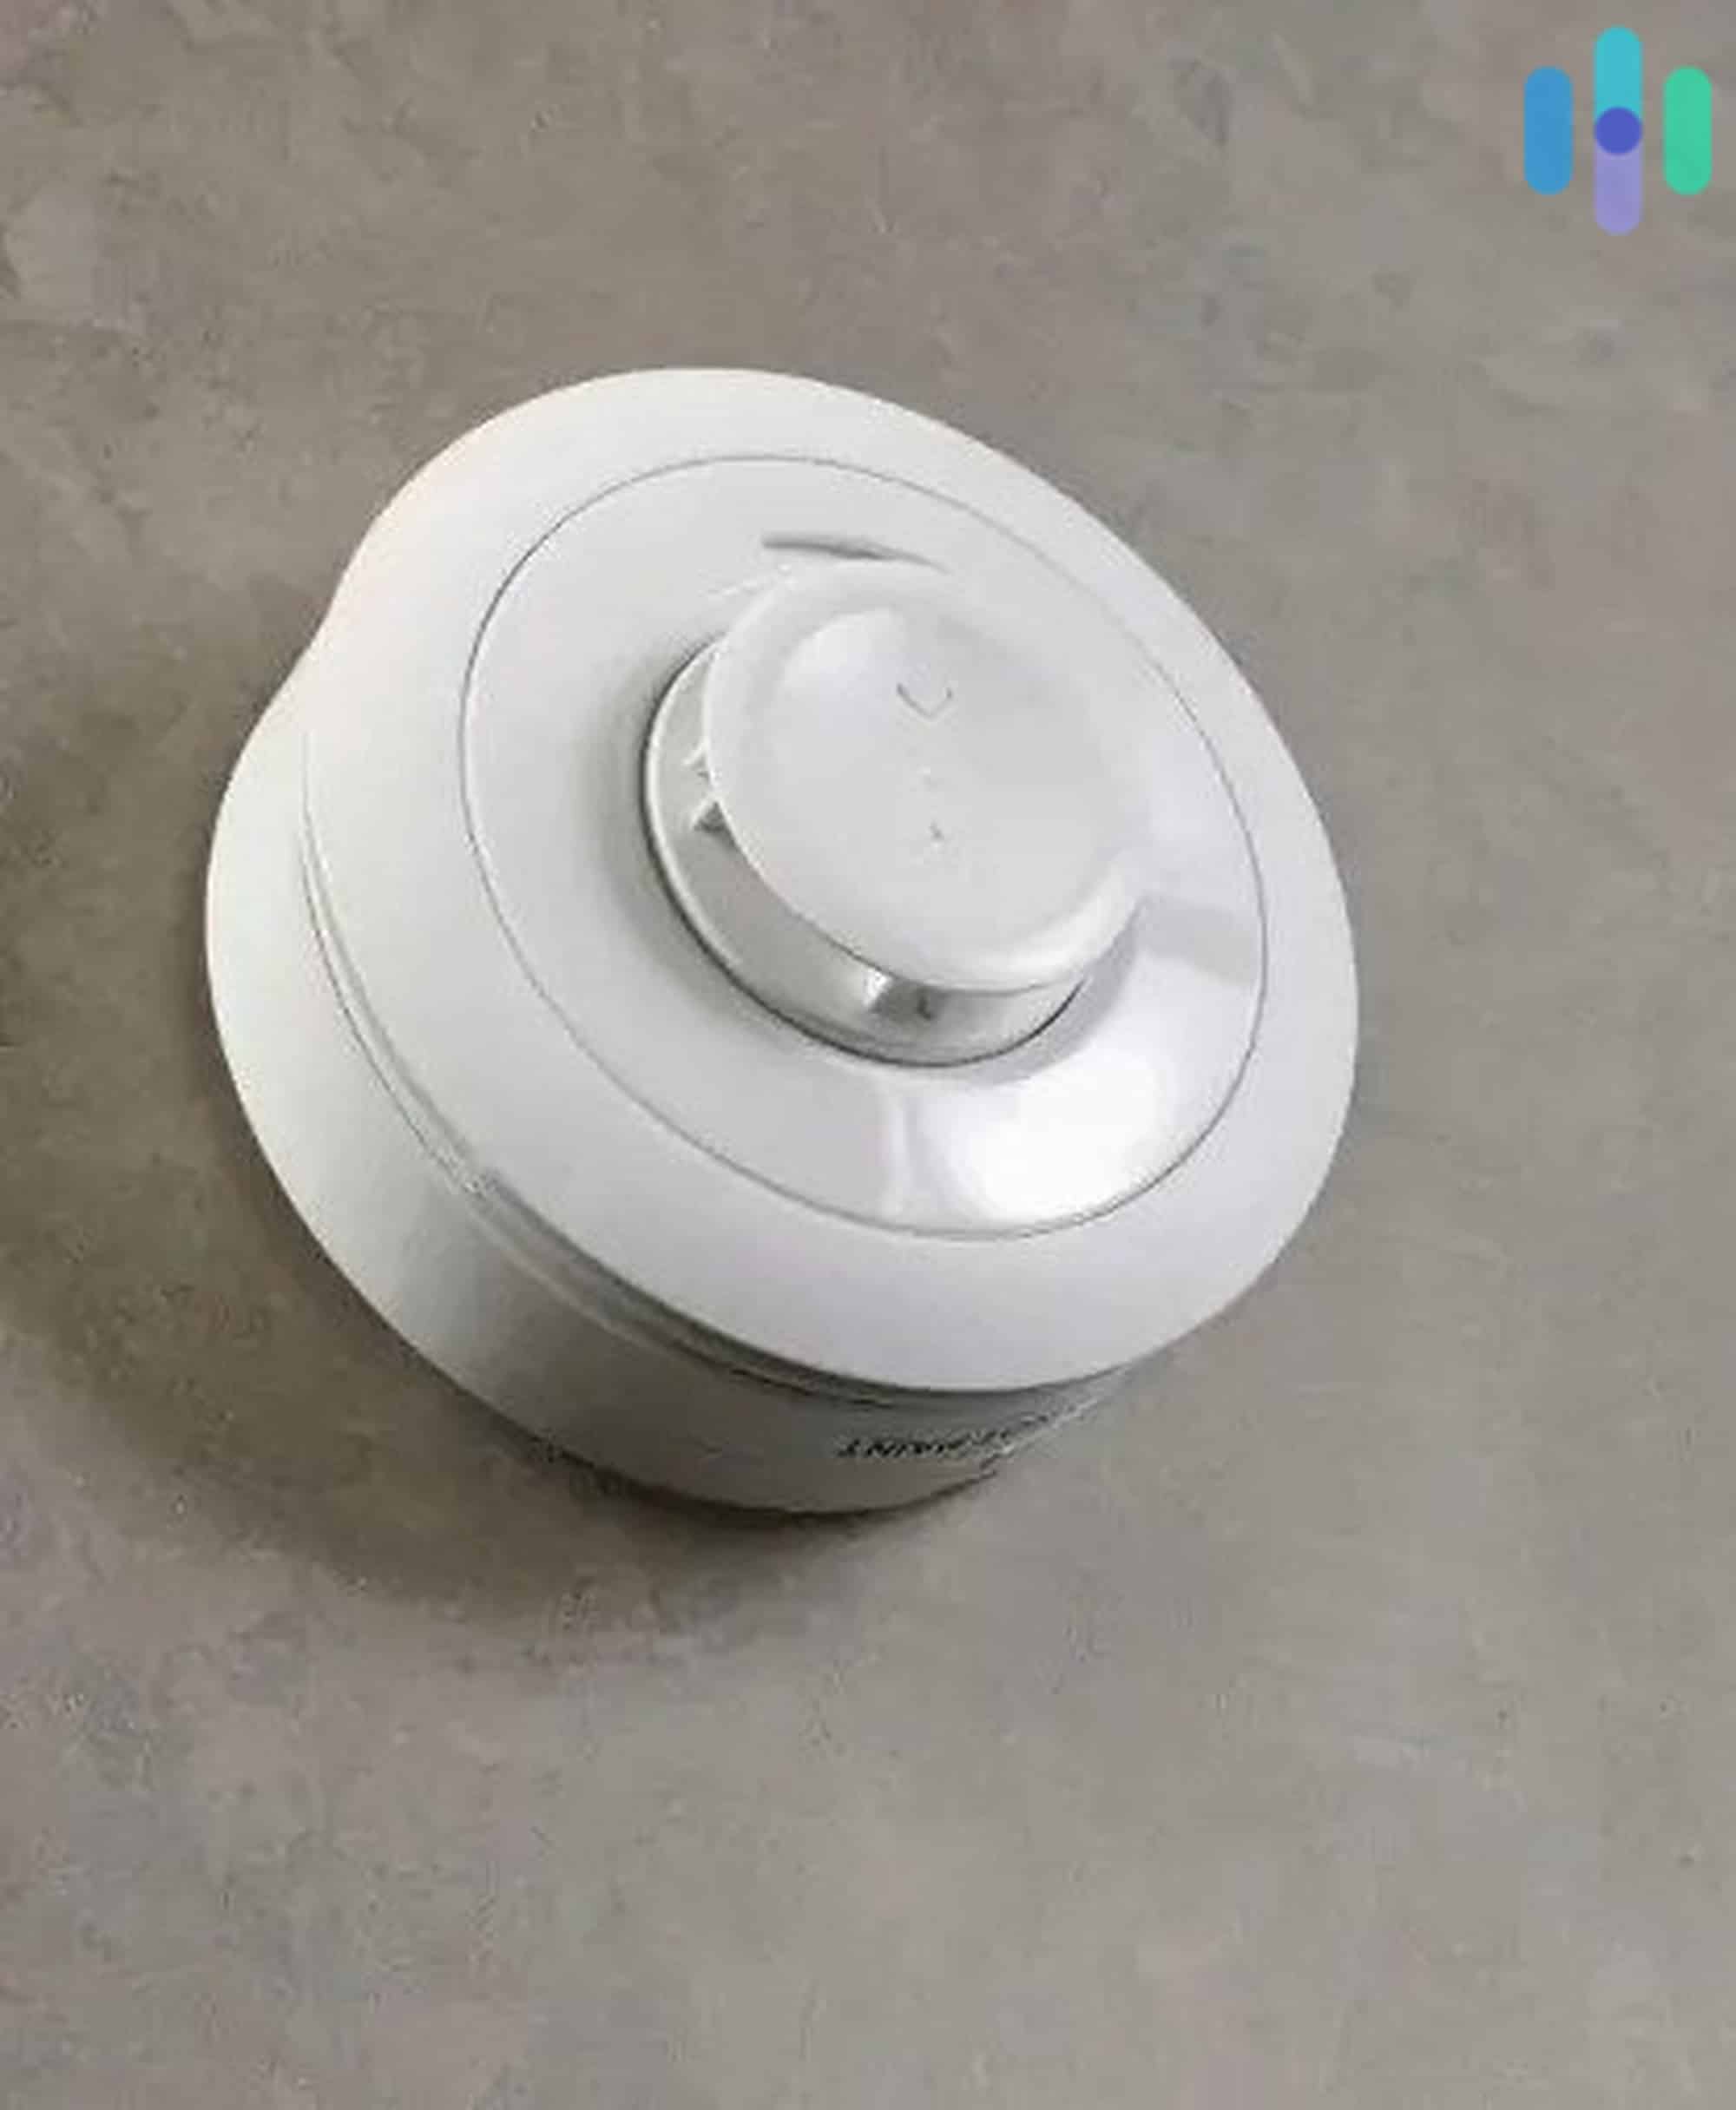 How To Turn Off Smoke Detector How To Turn Off a Smoke Alarm After It Goes Off